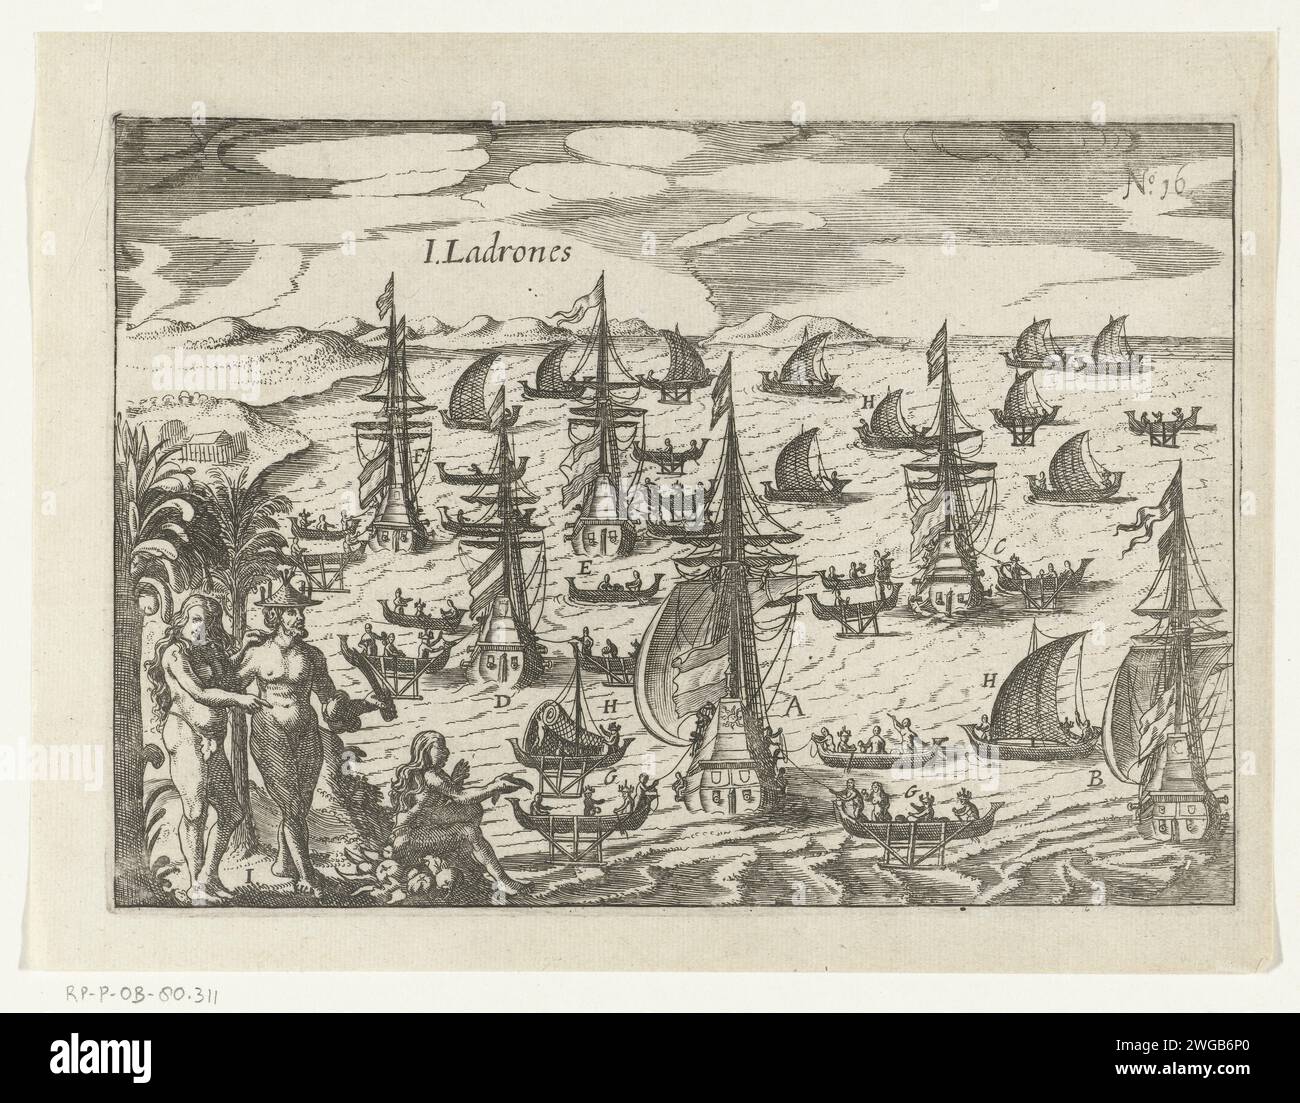 Arrival at the Ladrones Islands, 1616, 1646 print Arrival of the fleet near the Ladrones or Mariana Islands, January 1616. The ships are for anchor: the son, the Maen, the Morghen-Star, the Aeolus, the hunter and the conquered ship. Different types of local vessels in the water. Left in the foreground two examples of the locals. Part of the illustrations in the report of the Joris van Spilbergen journey around the world, 1614-1617, No. 16. Northern Netherlands paper etching exploration, expedition, voyage of discovery. landscapes in tropical and sub-tropical regions Mariana Islands Stock Photo